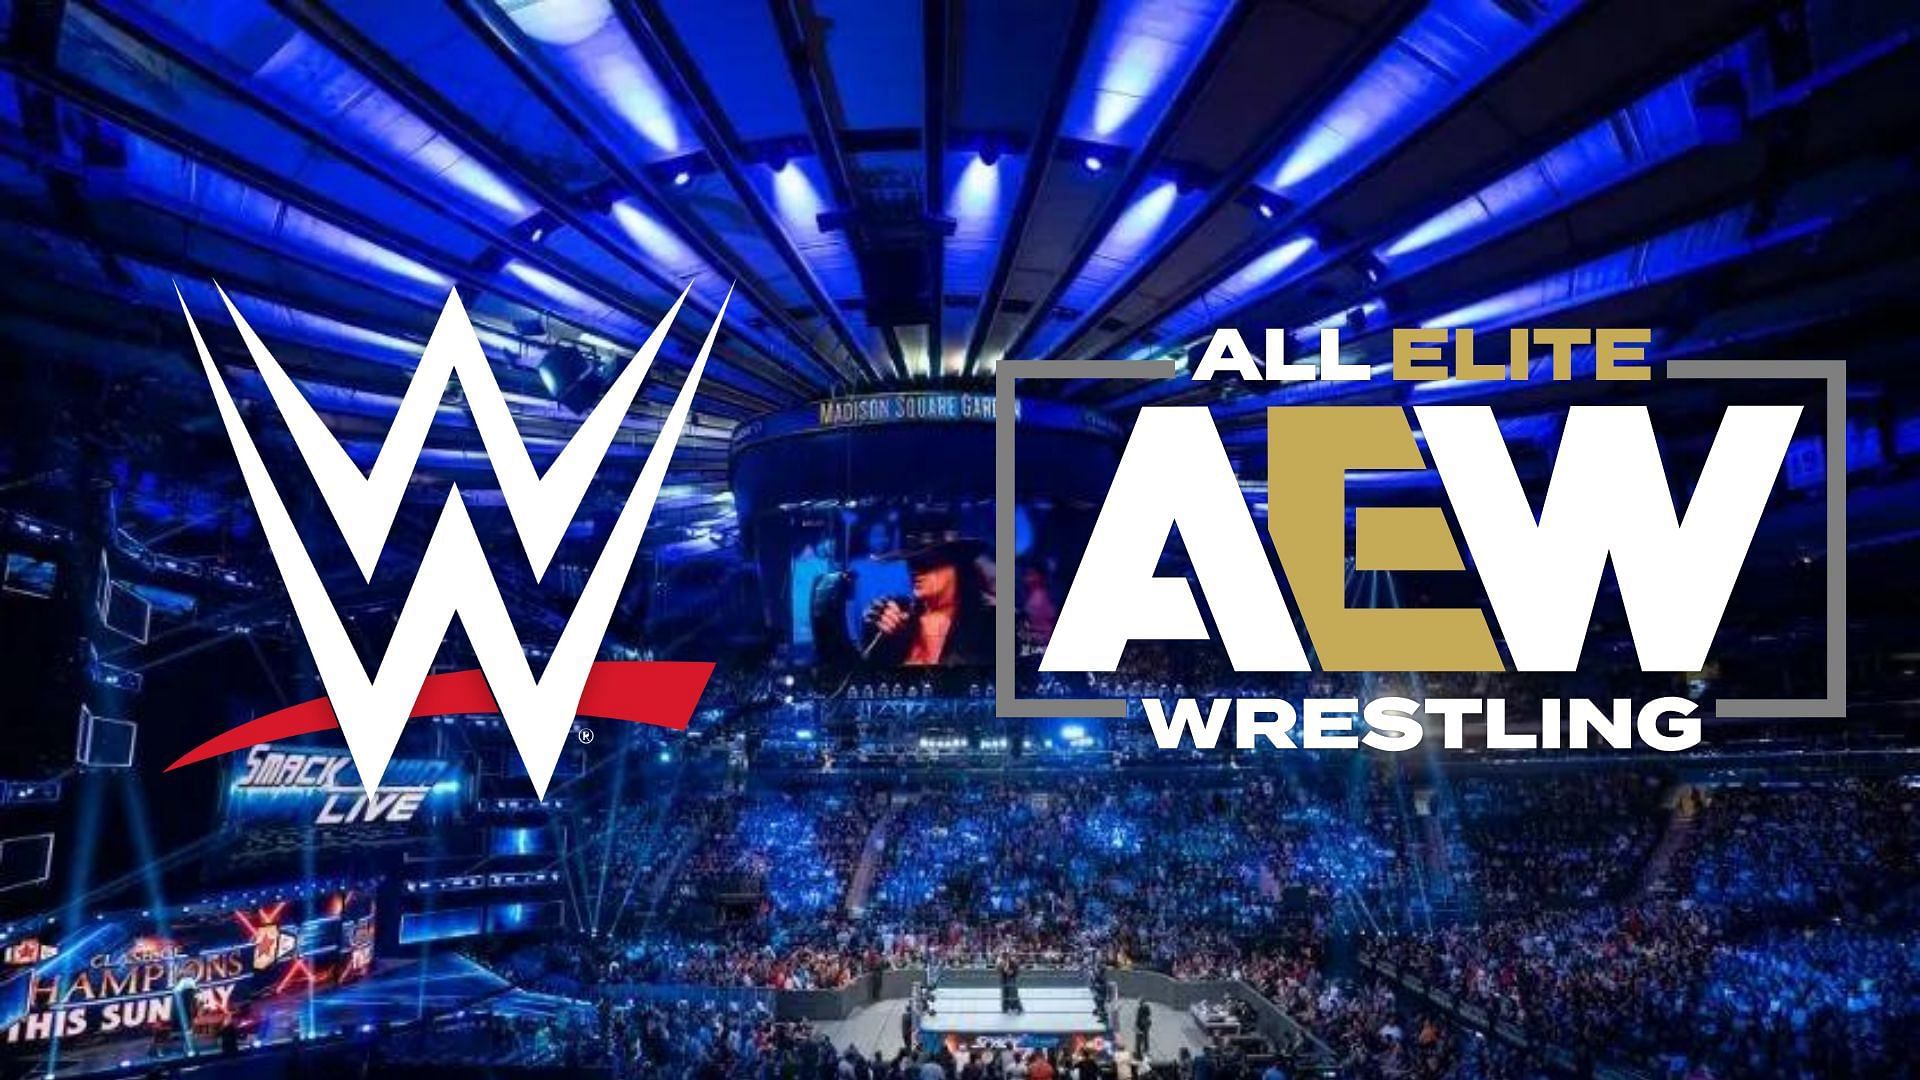 When did this AEW star find their breakthrough moment in WWE?